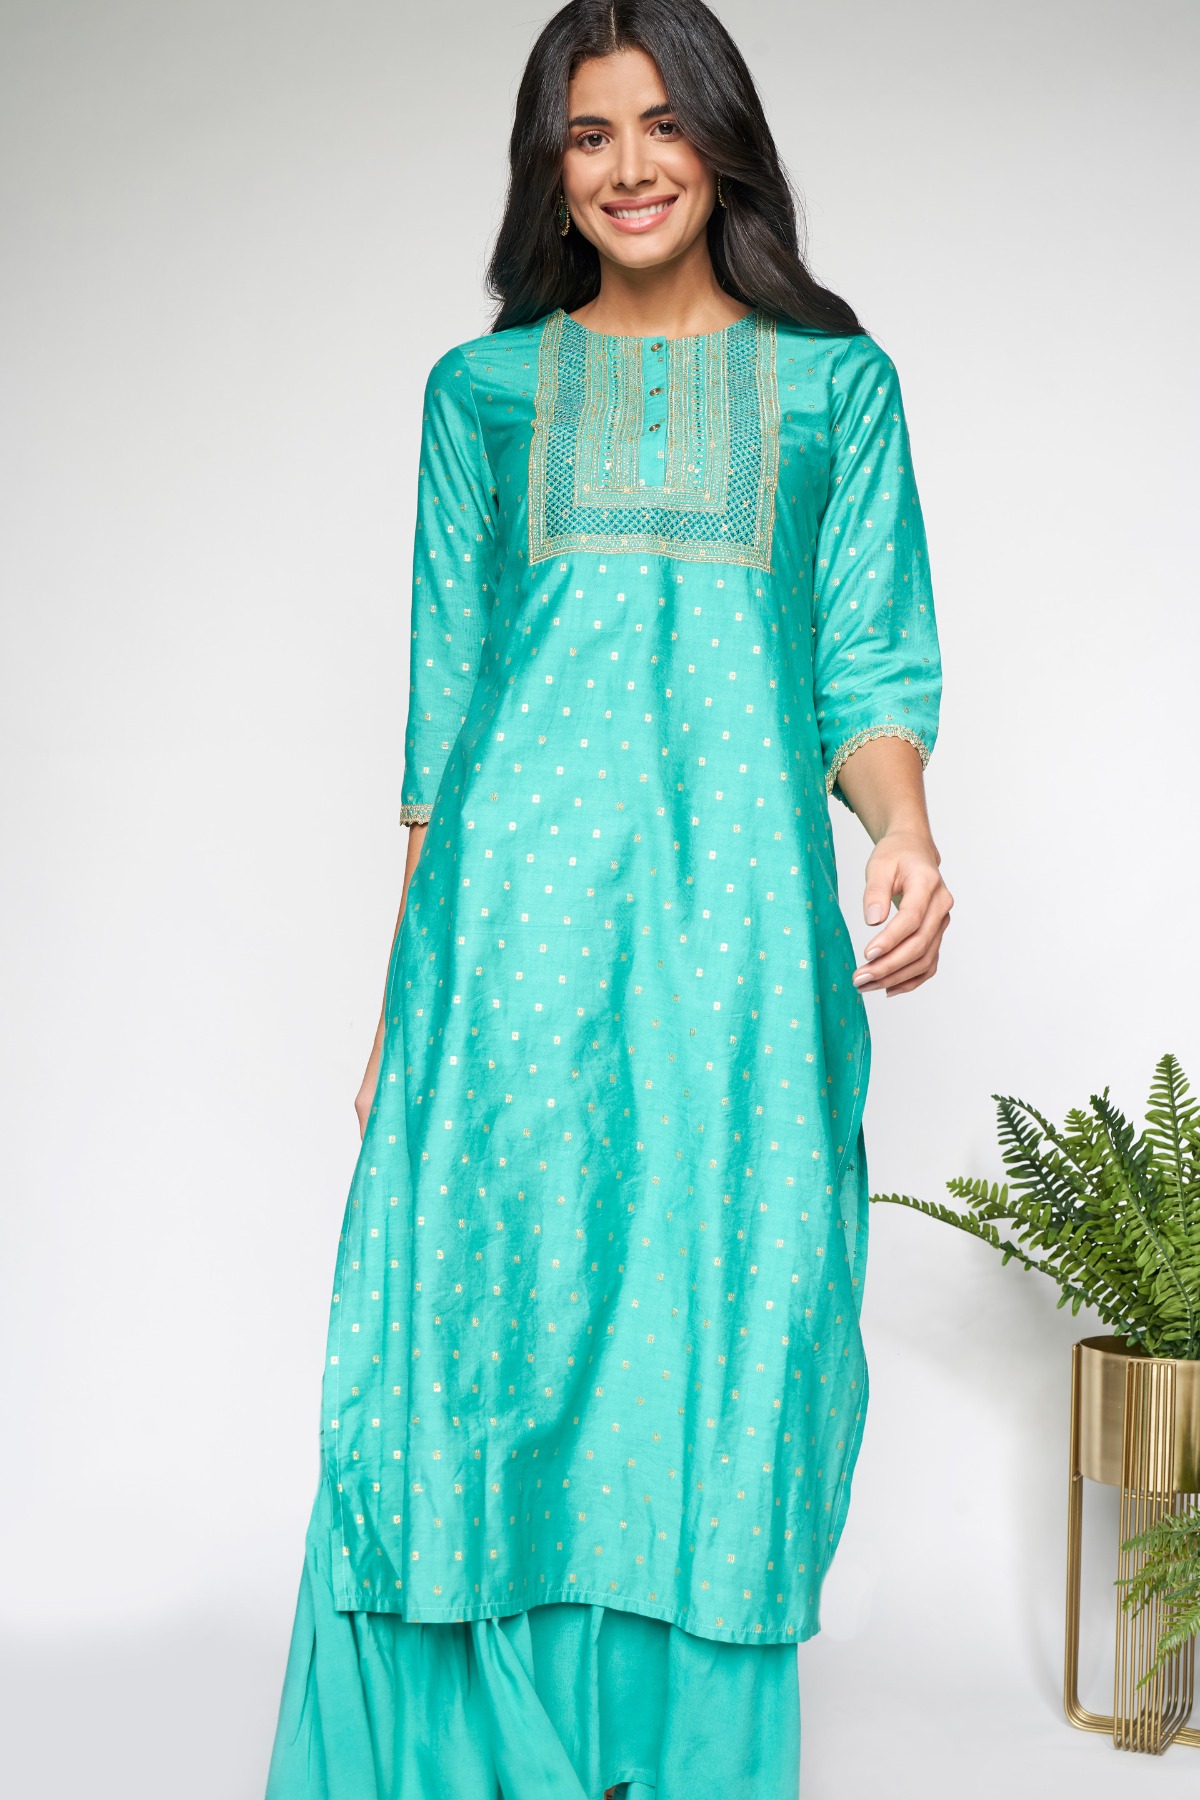 Buy GLOBAL DESI Embroidered Viscose Boat Neck Women's Top | Shoppers Stop